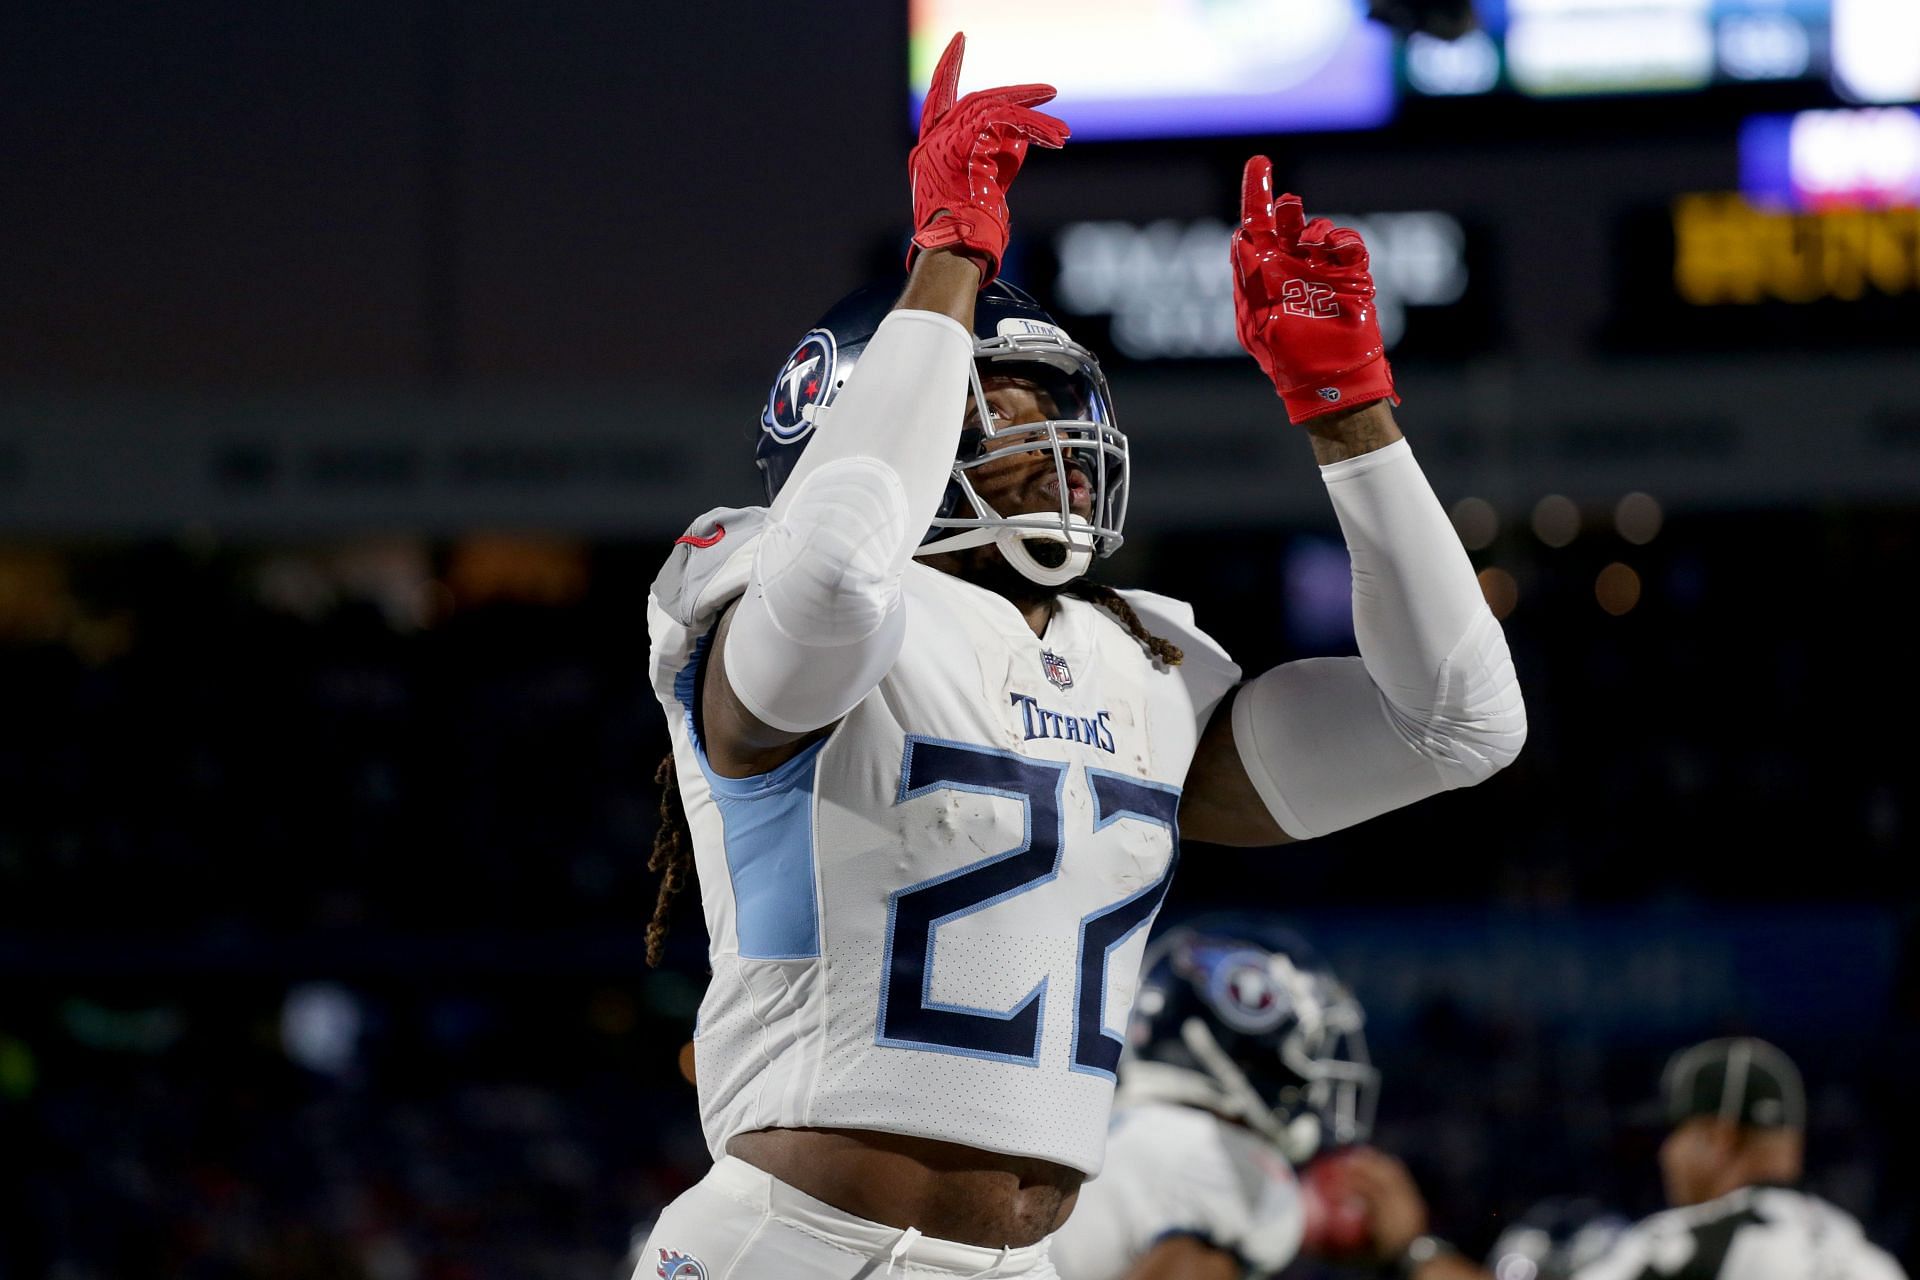 Titans GM downplays Henry trade rumors: No one's called about him